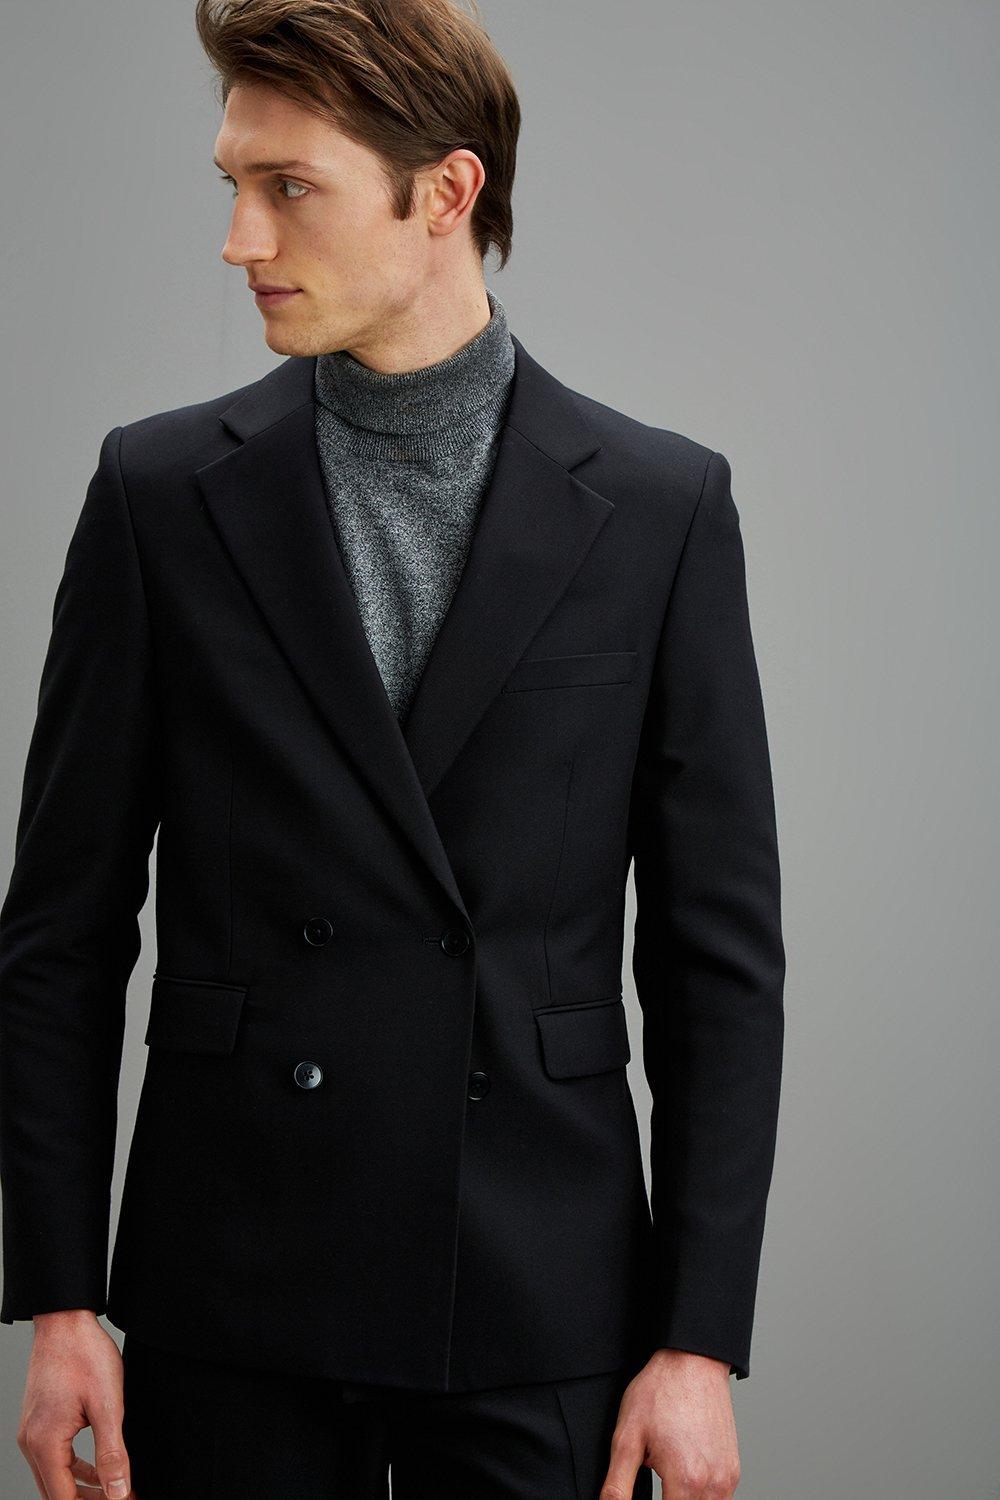 Suits | Skinny Fit Black Double Breasted Bi-stretch Jacket | Burton